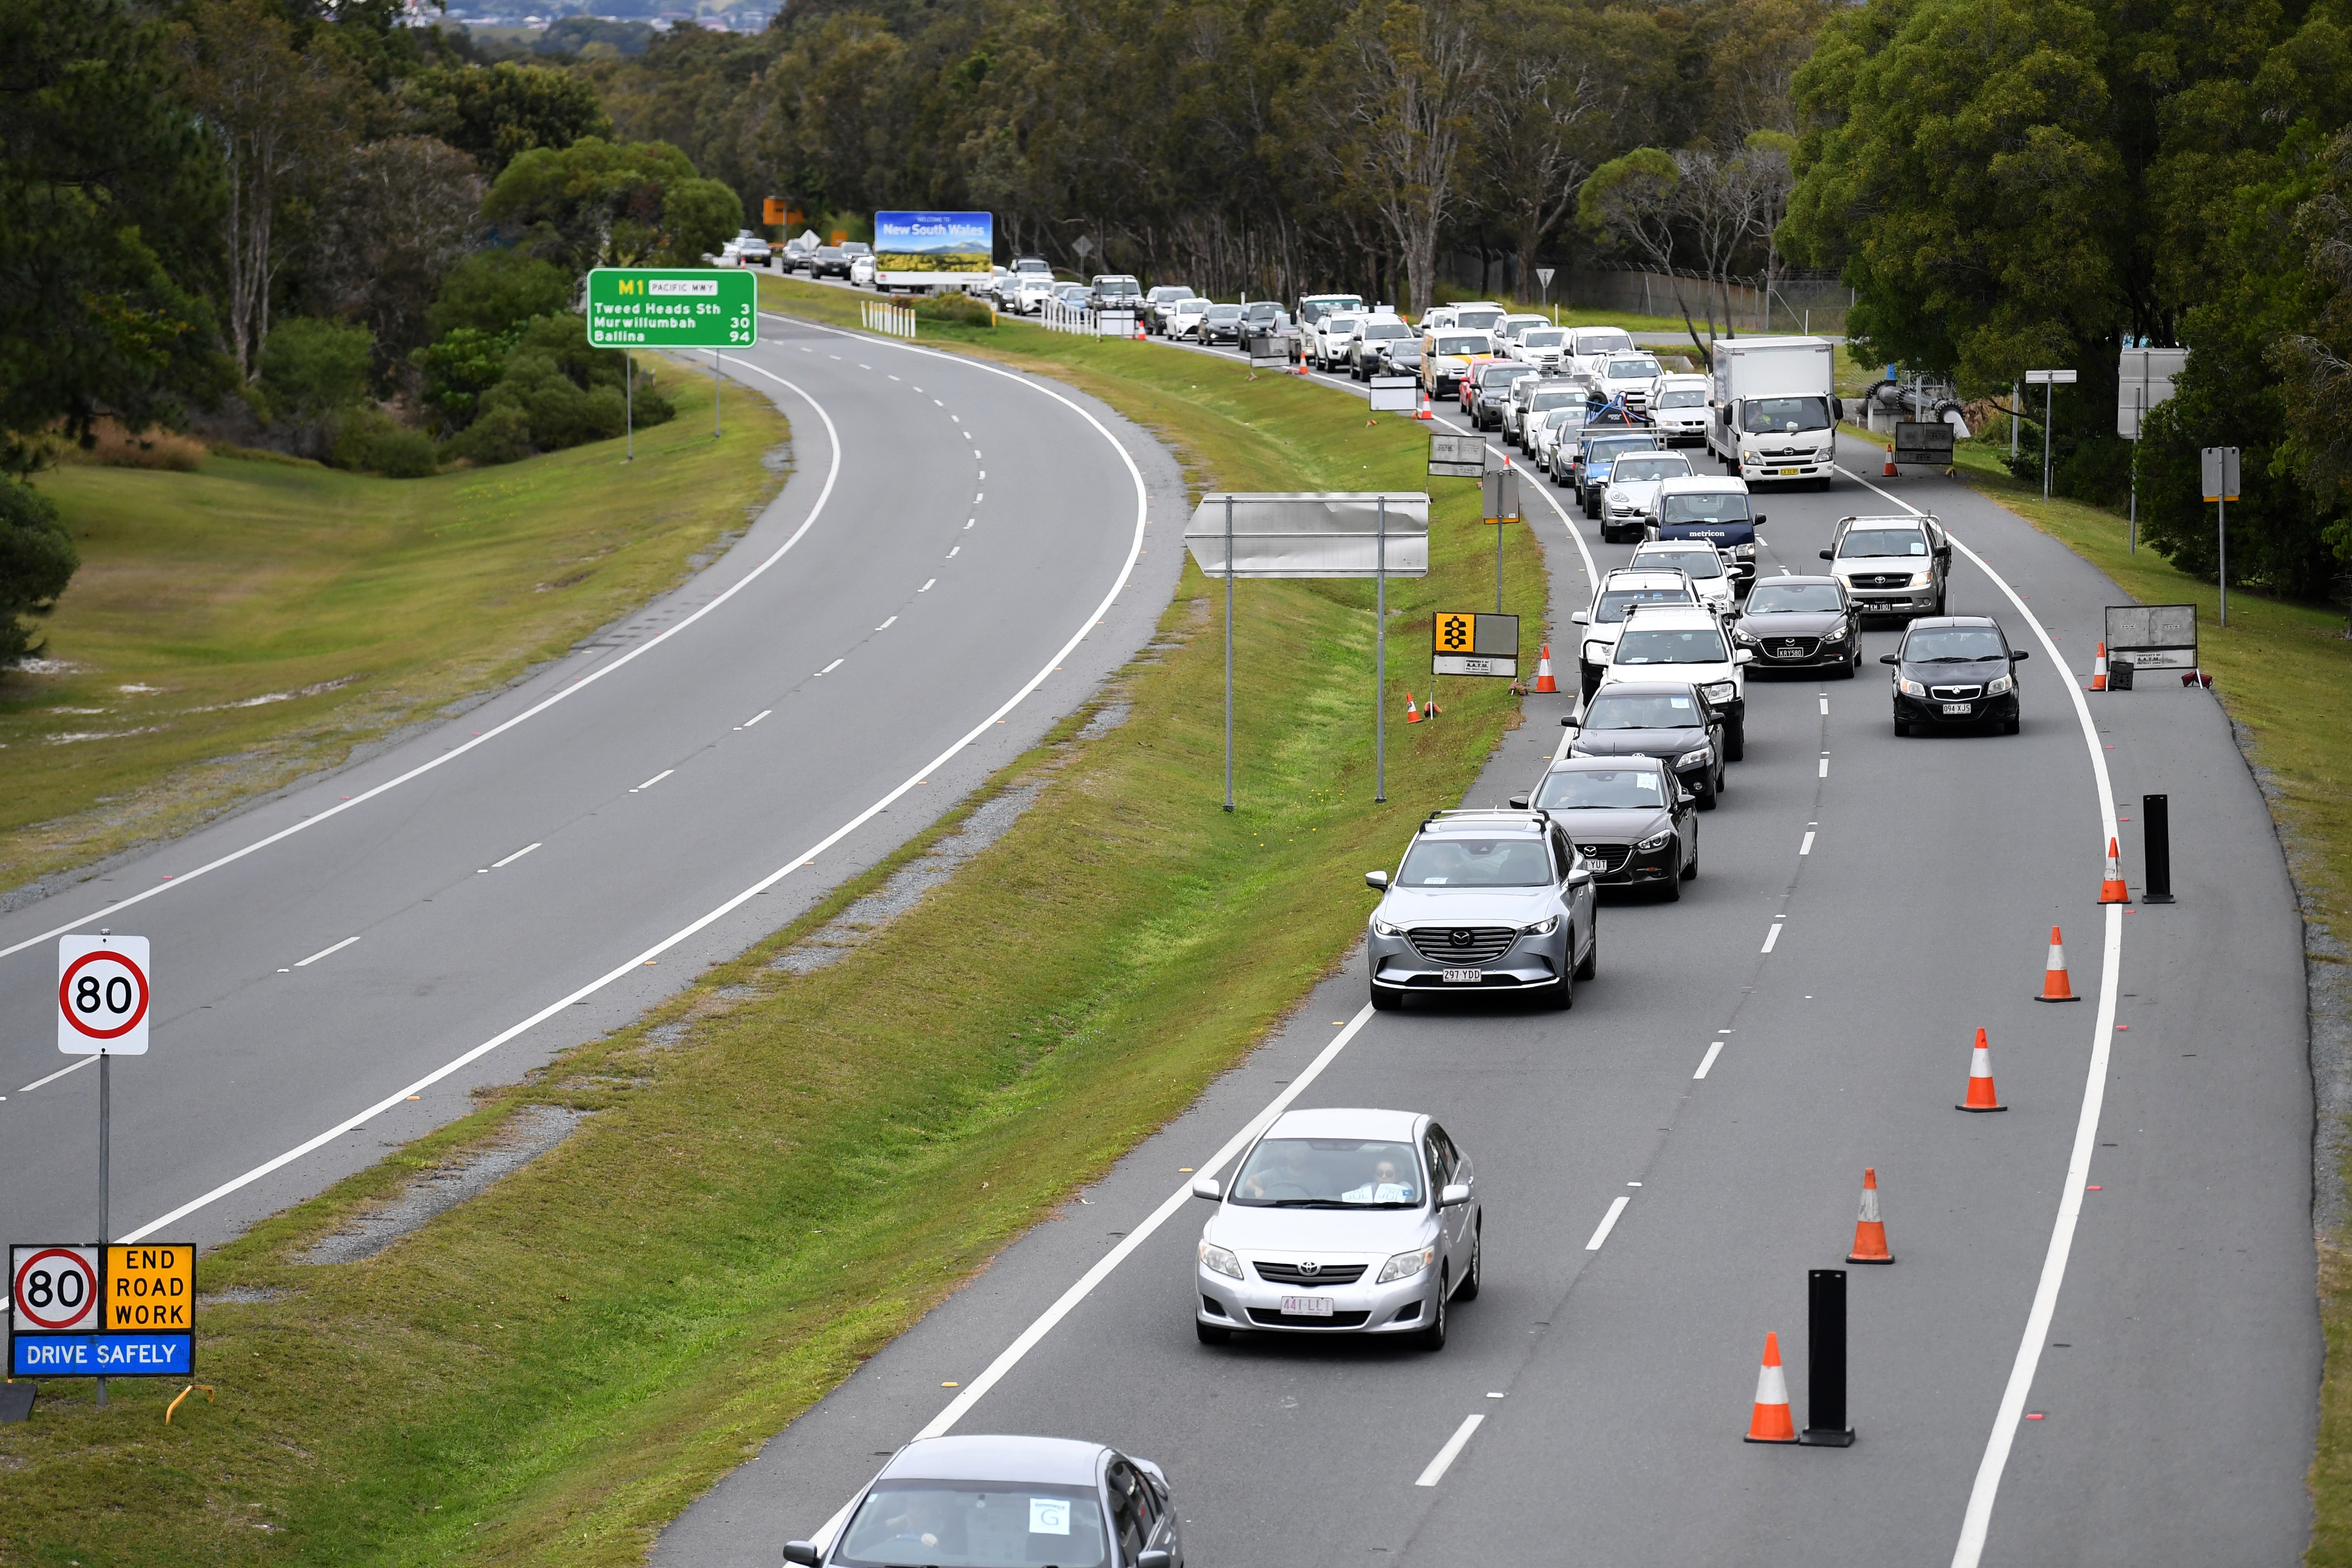 Vehicles arriving from New South Wales line up on approach to a checkpoint at on the Queensland border in Coolangatta on the Gold Coast.